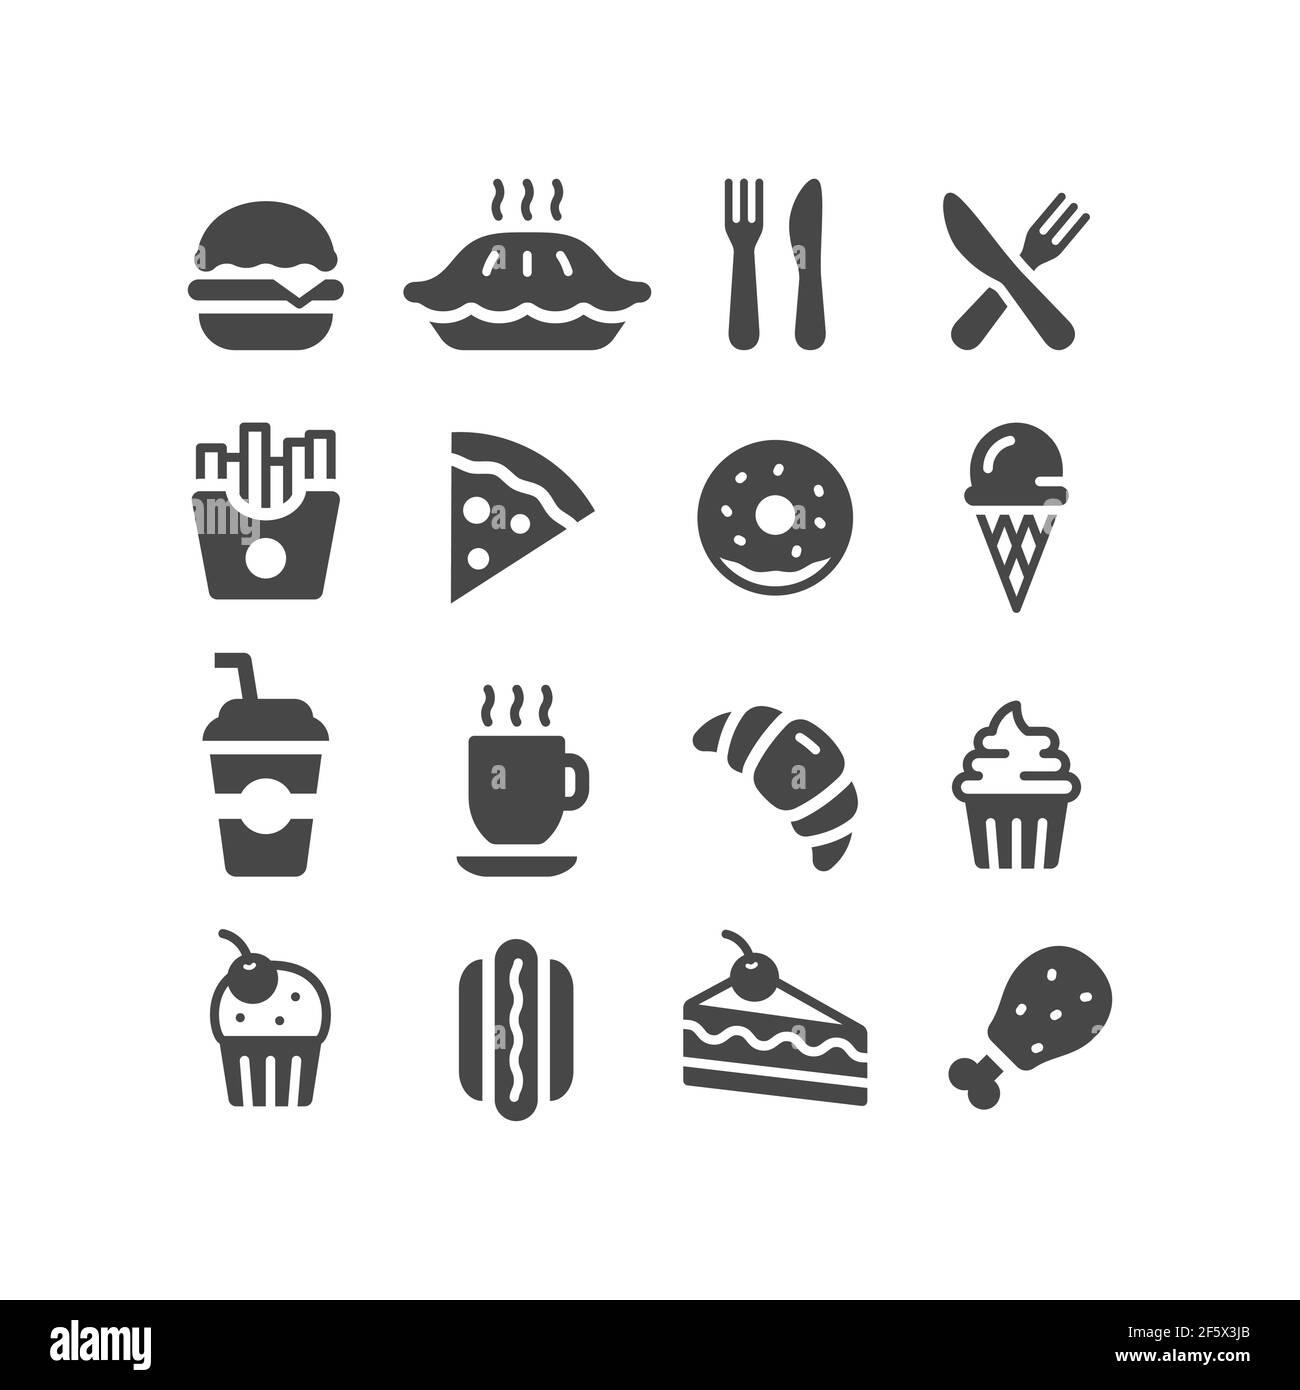 Fast food restaurant or diner vector icon set. Donut, burger, cake, soda black icons. Stock Vector